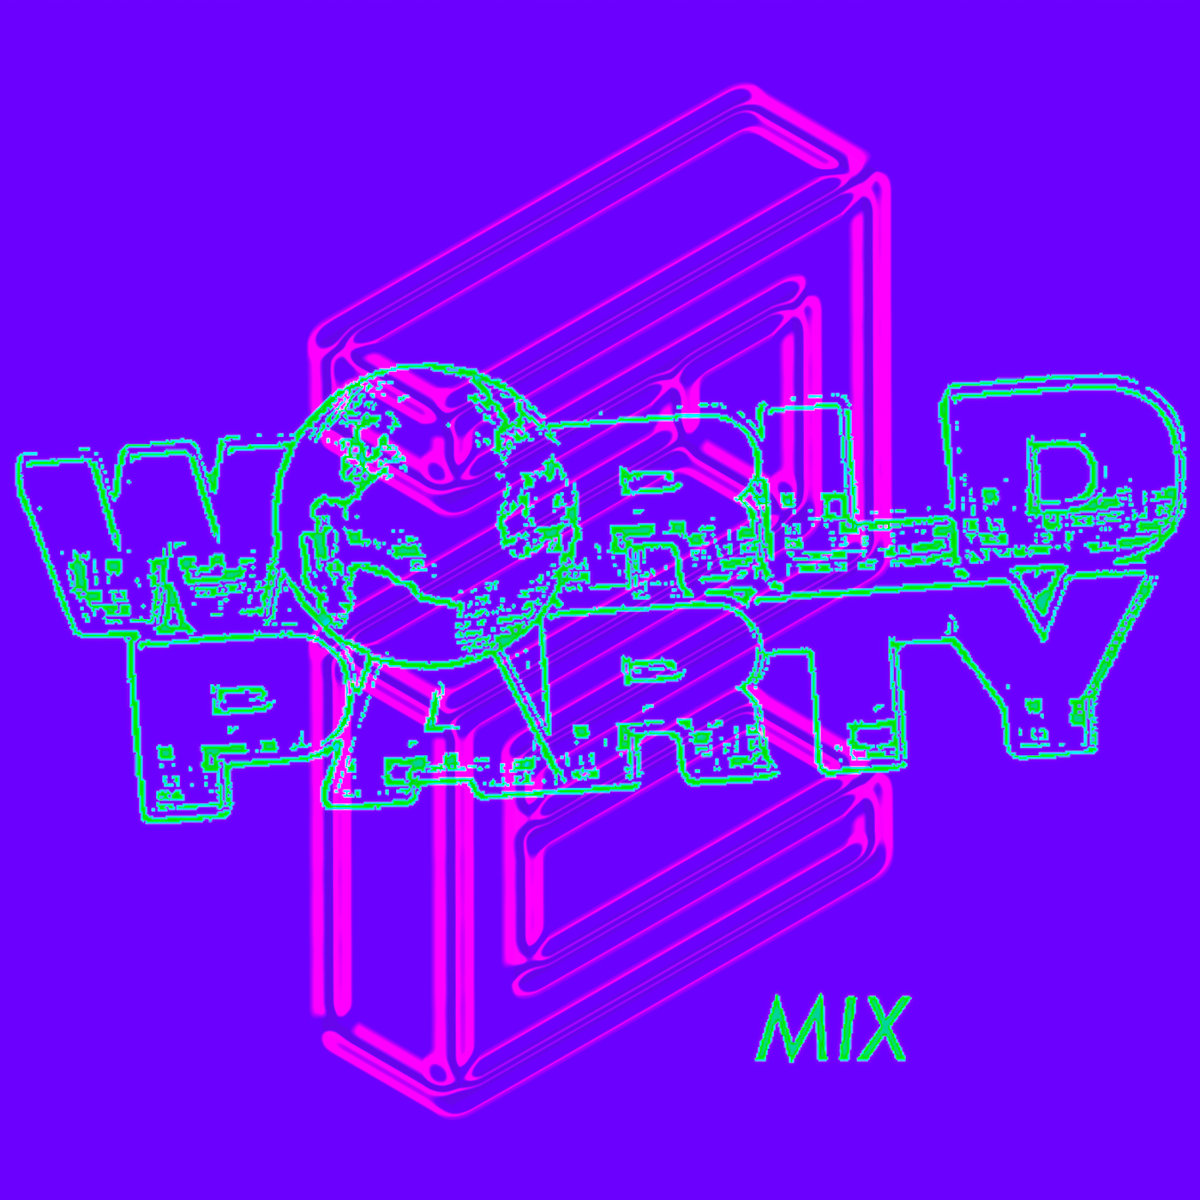 WORLD PARTY MIX 2